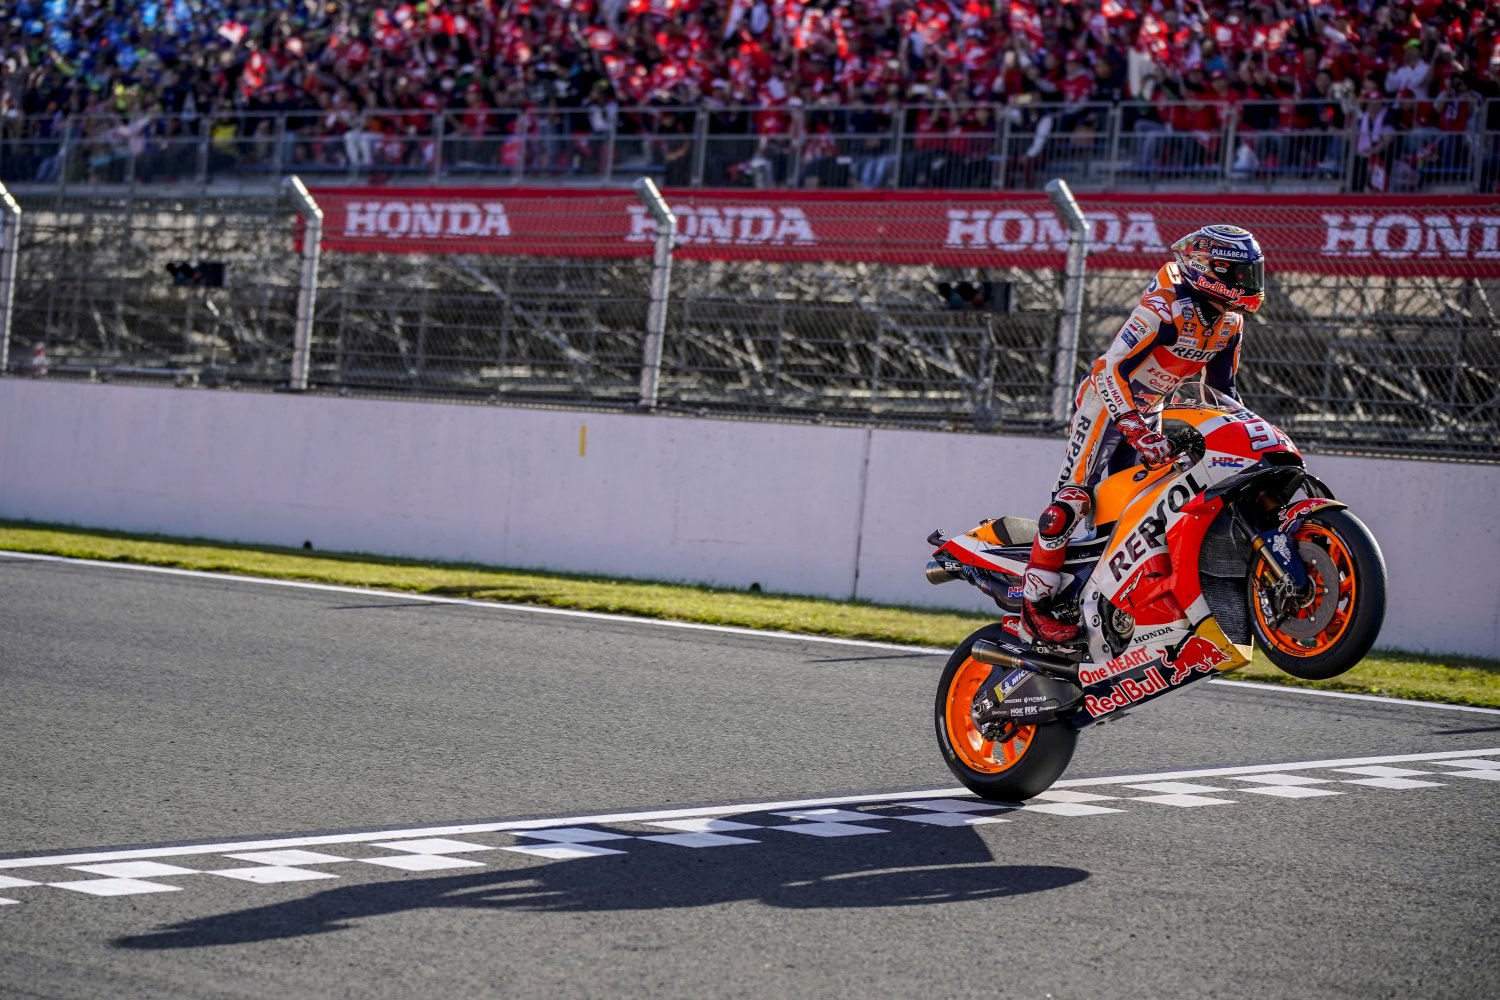 Marquez storms across the line doing a wheelie to win